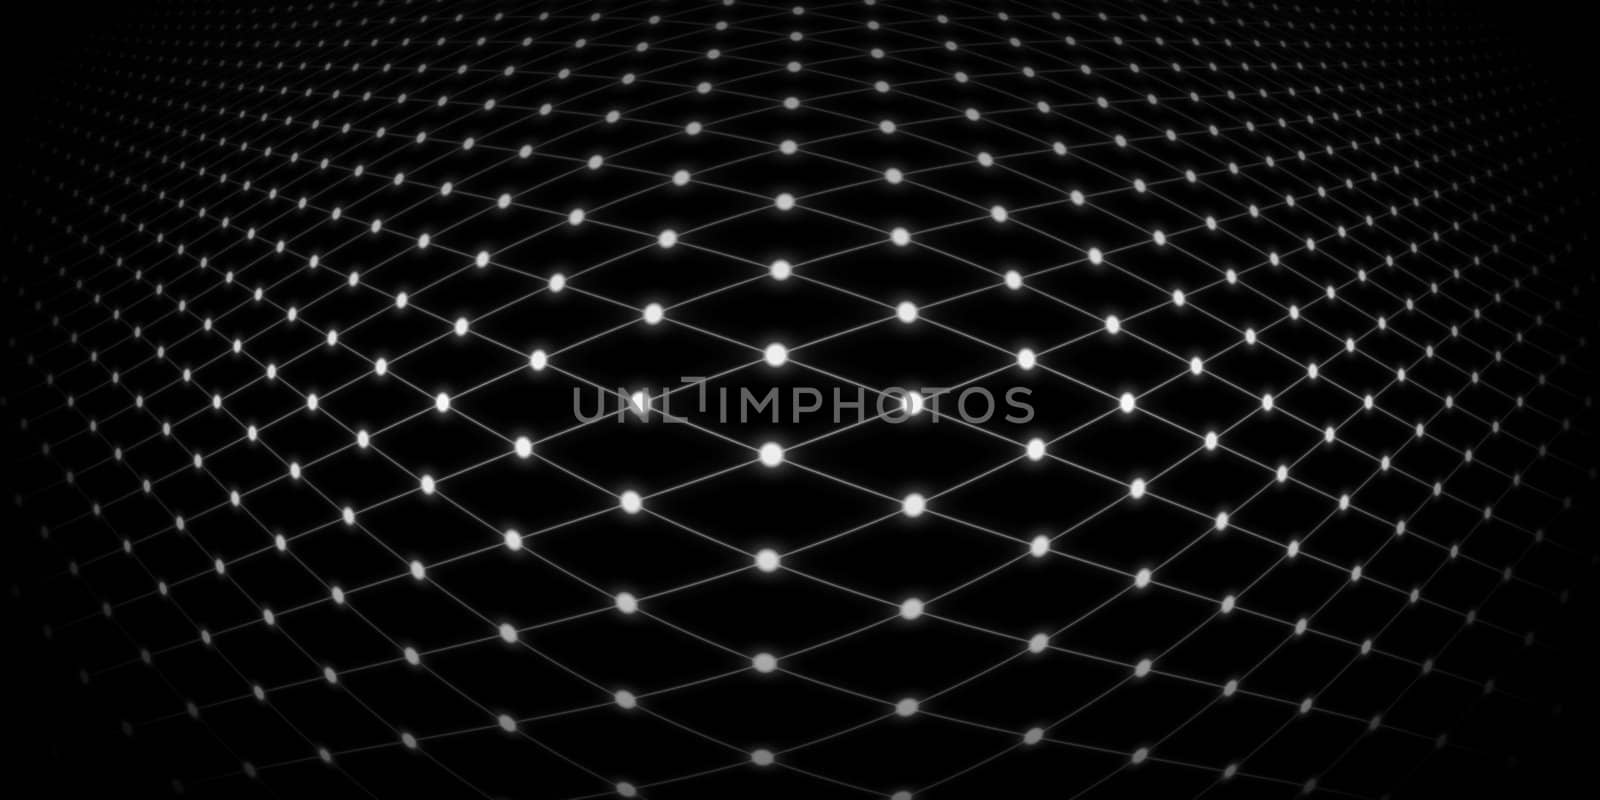 Abstract background of a warped grid with glowing white dots